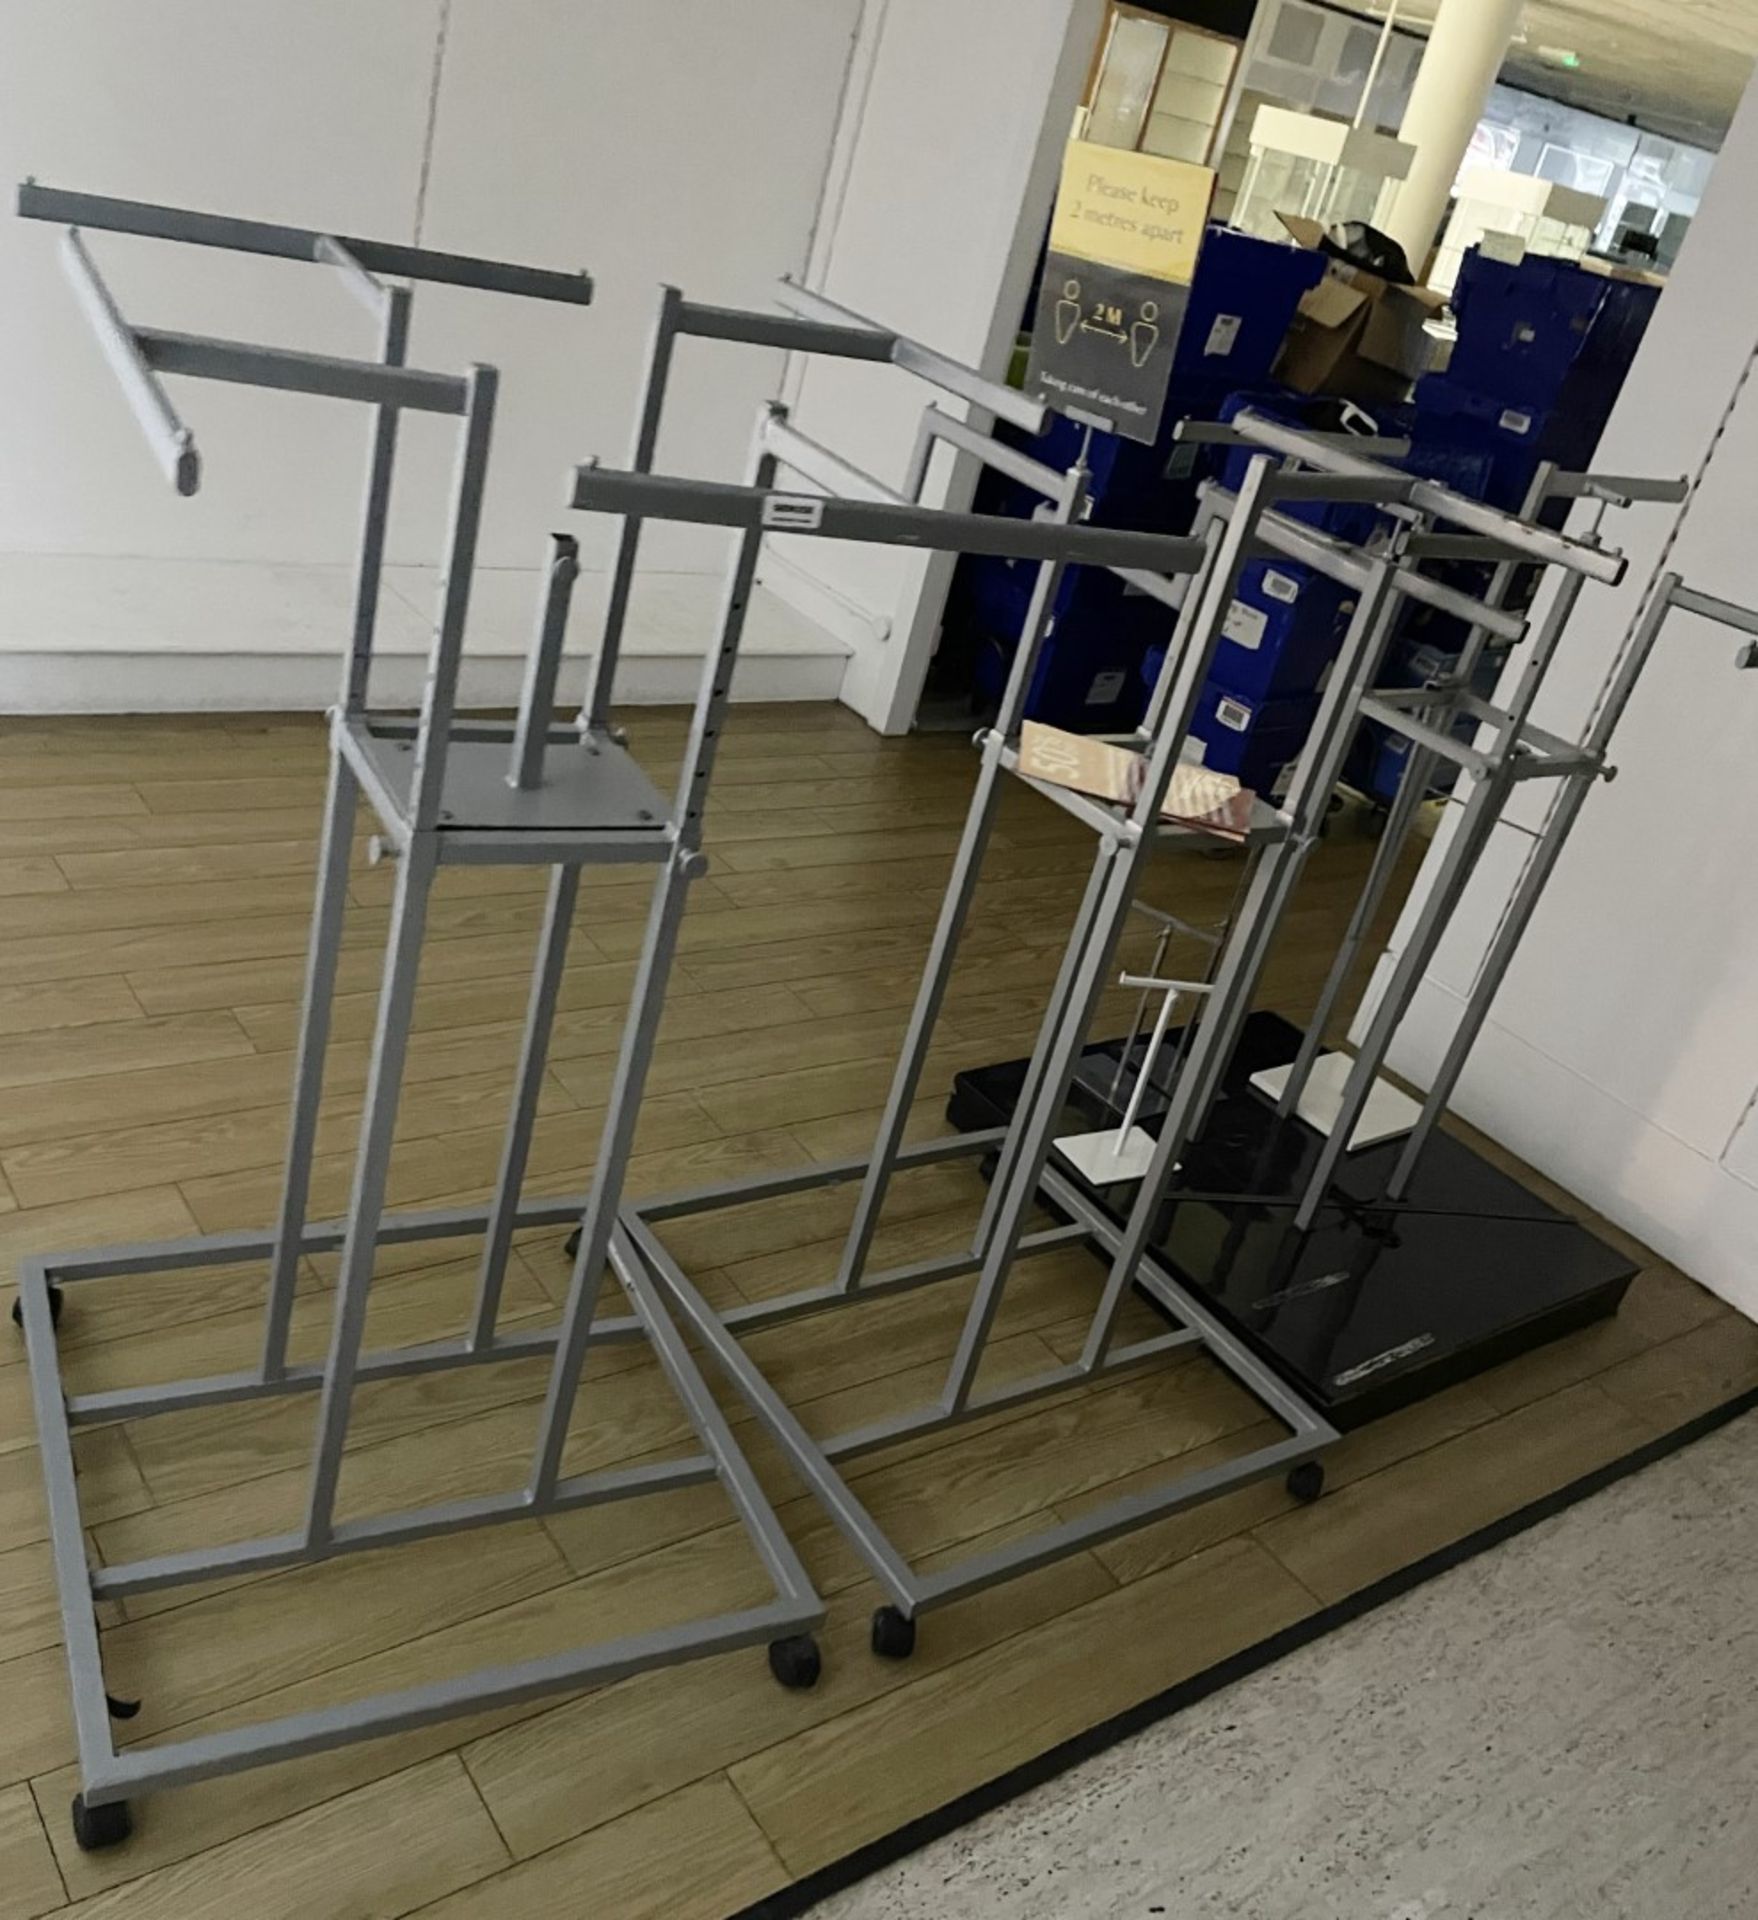 9 x Retail Display Clothes Rails Stands With Four Stepped Arm Rails - CL670 - Ref: GEM258 - - Image 2 of 7